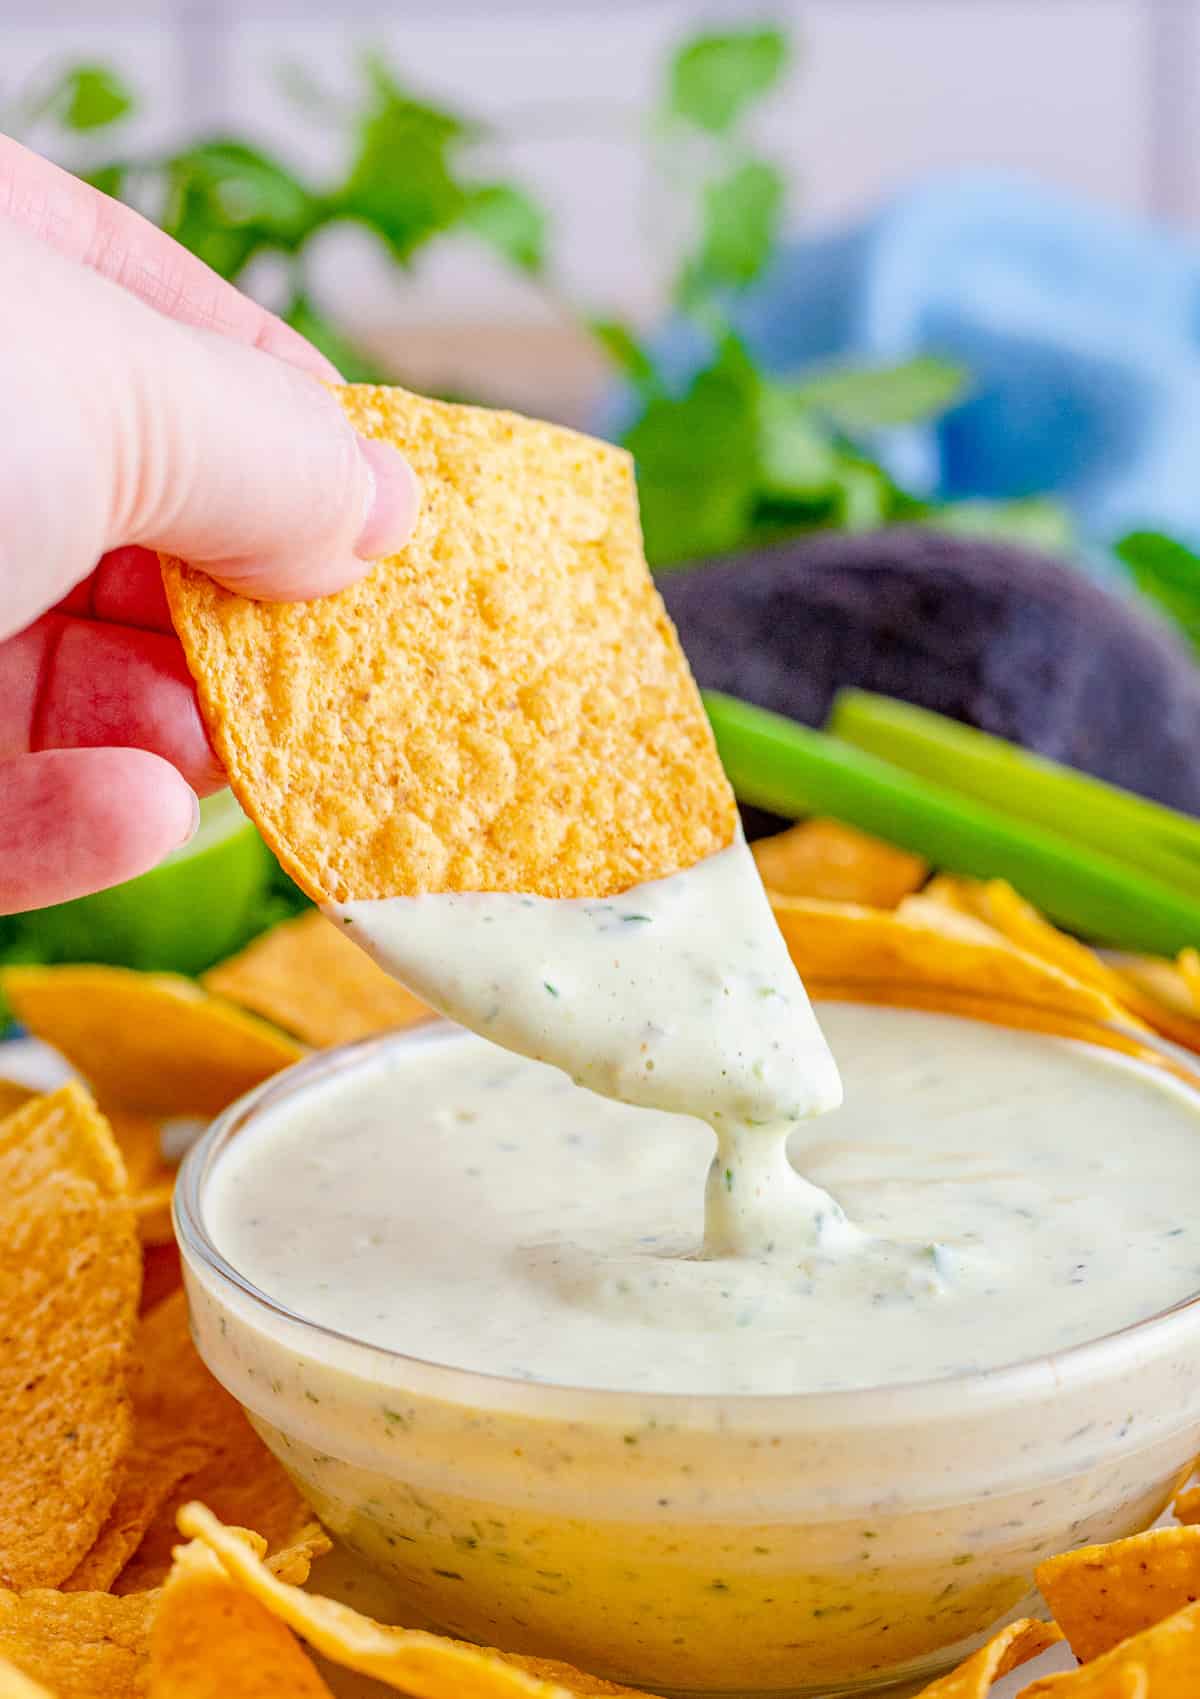 Chip lifted out of bowl with the ranch dripping off of it.